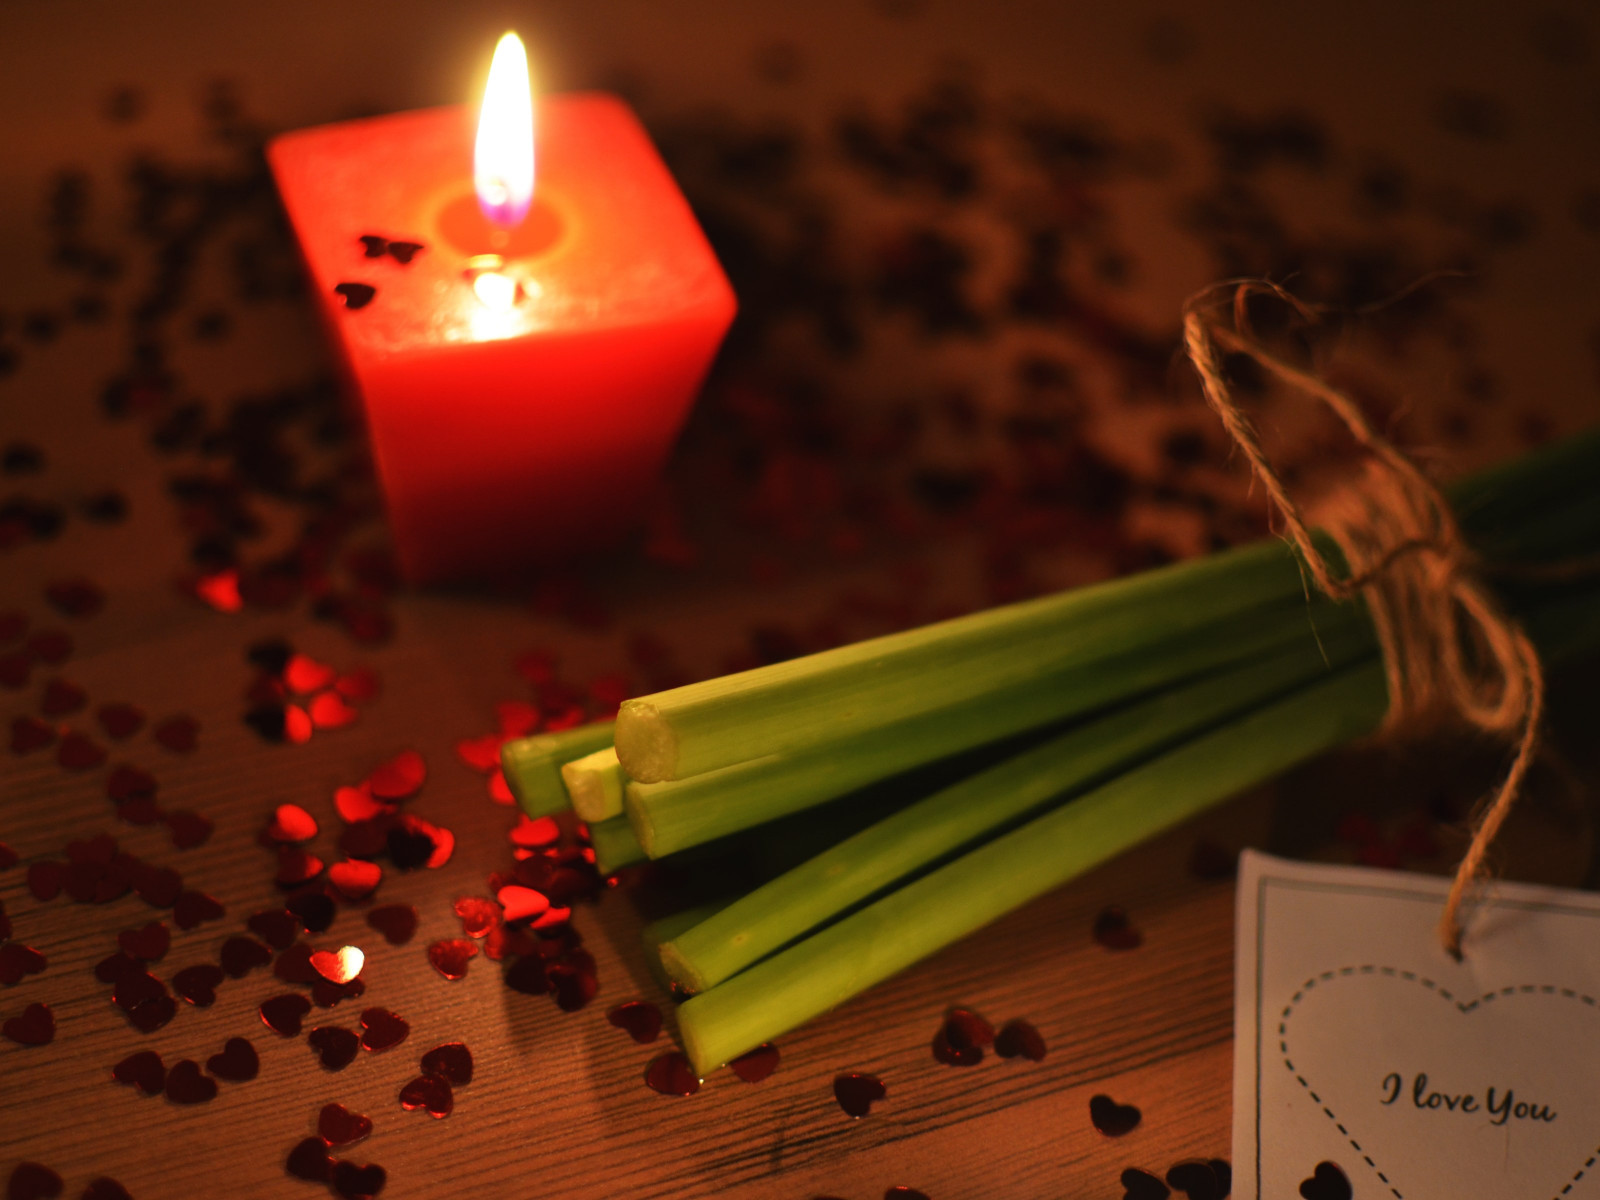 I love you, candlelight, romantic wallpaper 1600x1200